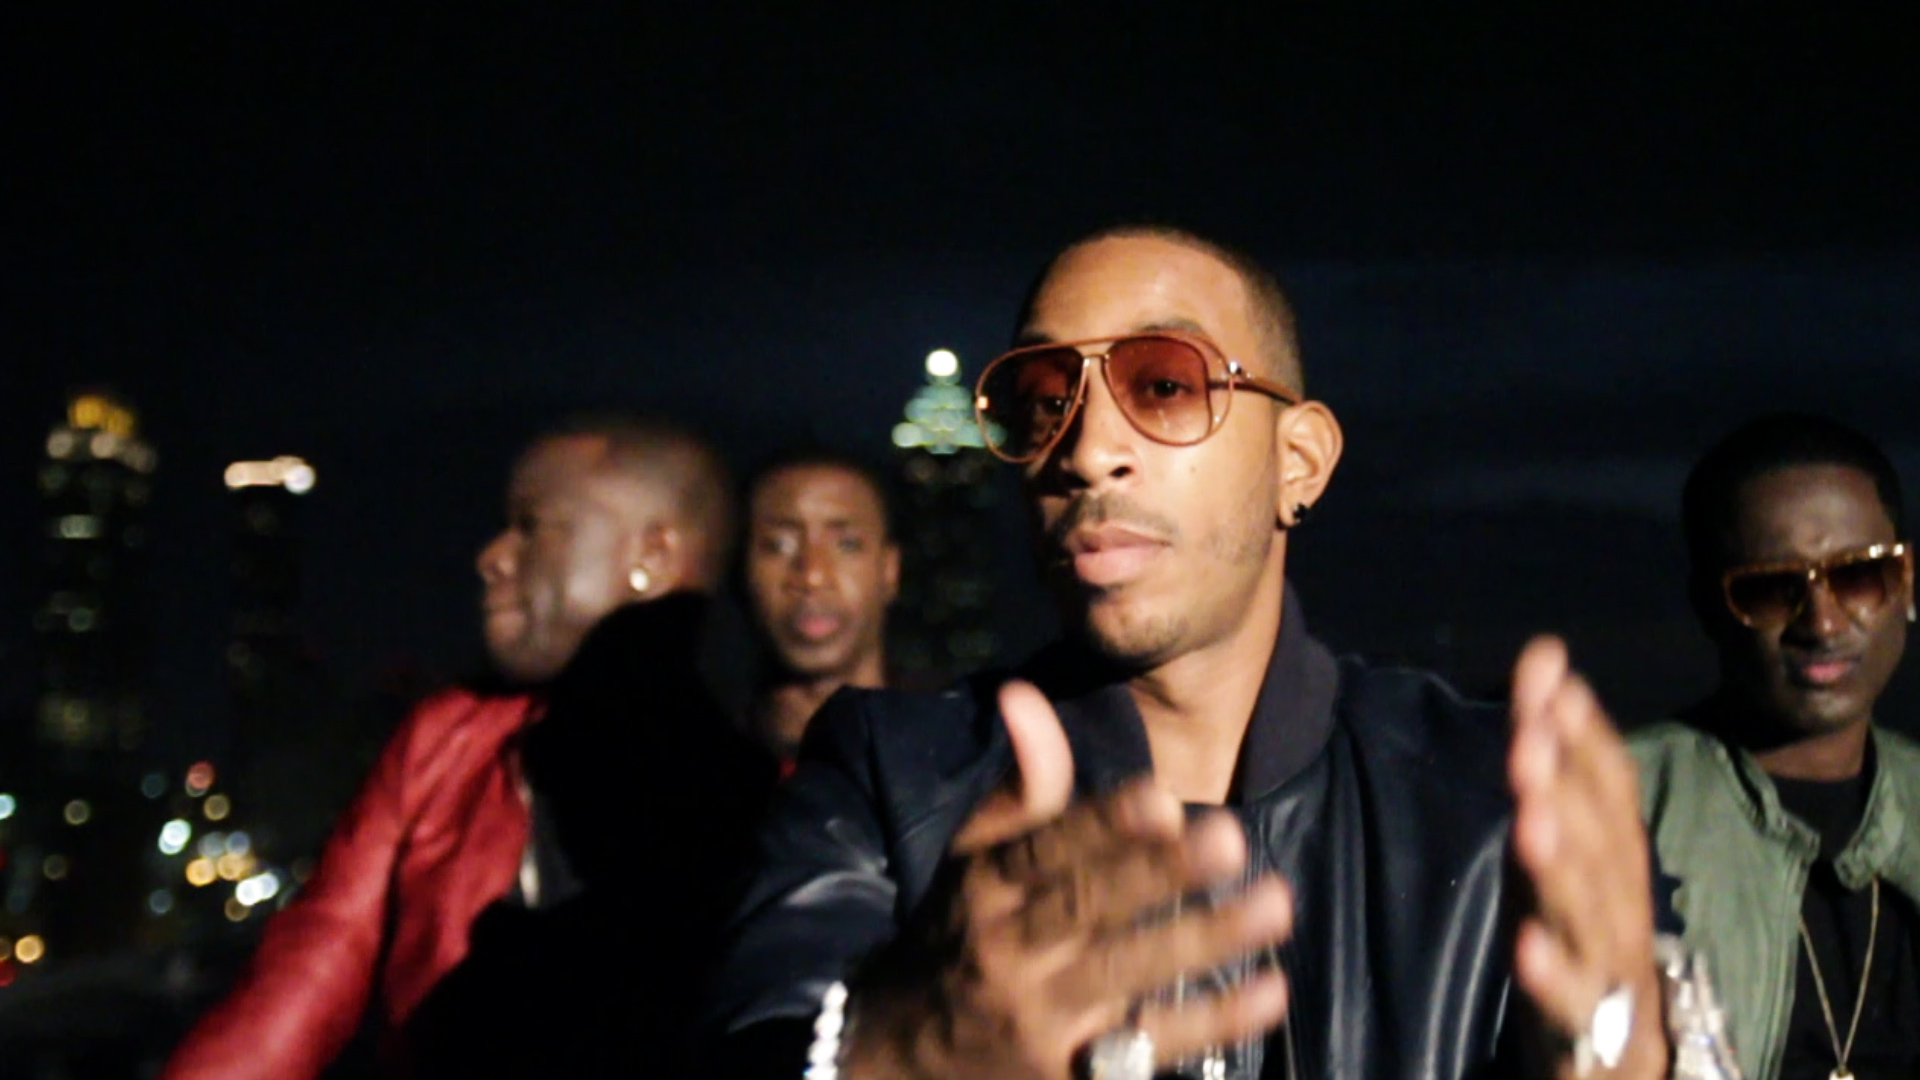 Filming music video with Ludacris and Untitled.